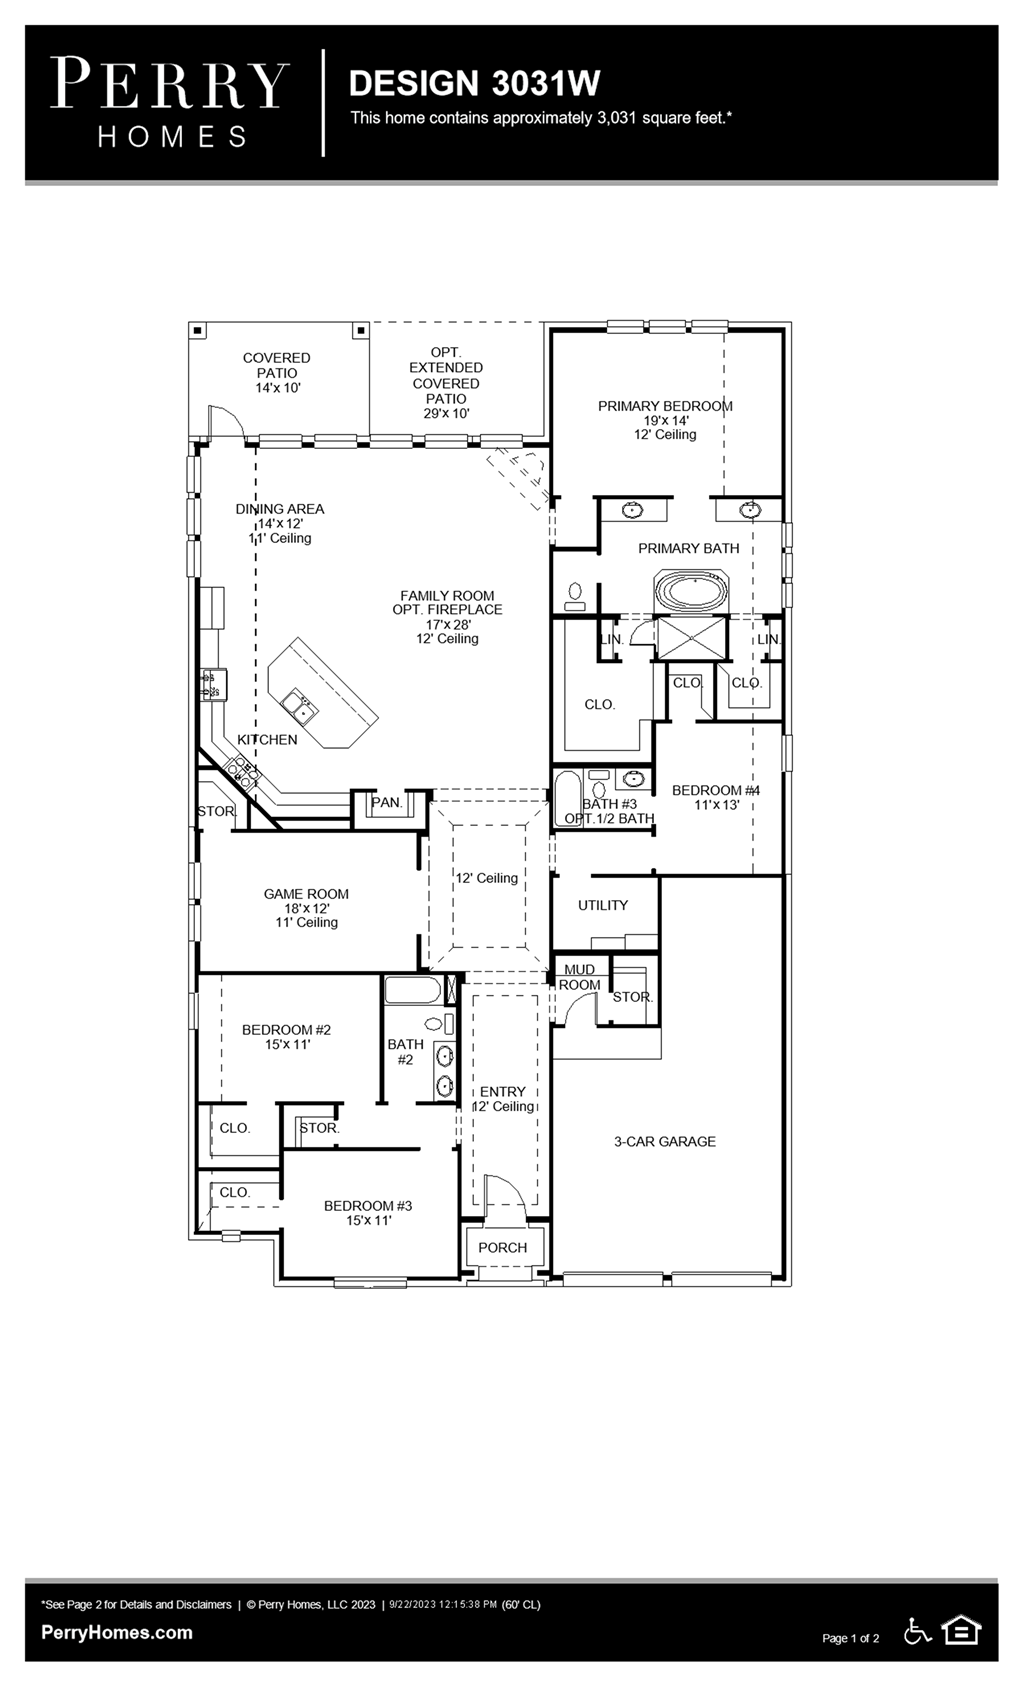 Available To Build In The Groves 60 Design 3031w Perry Homes